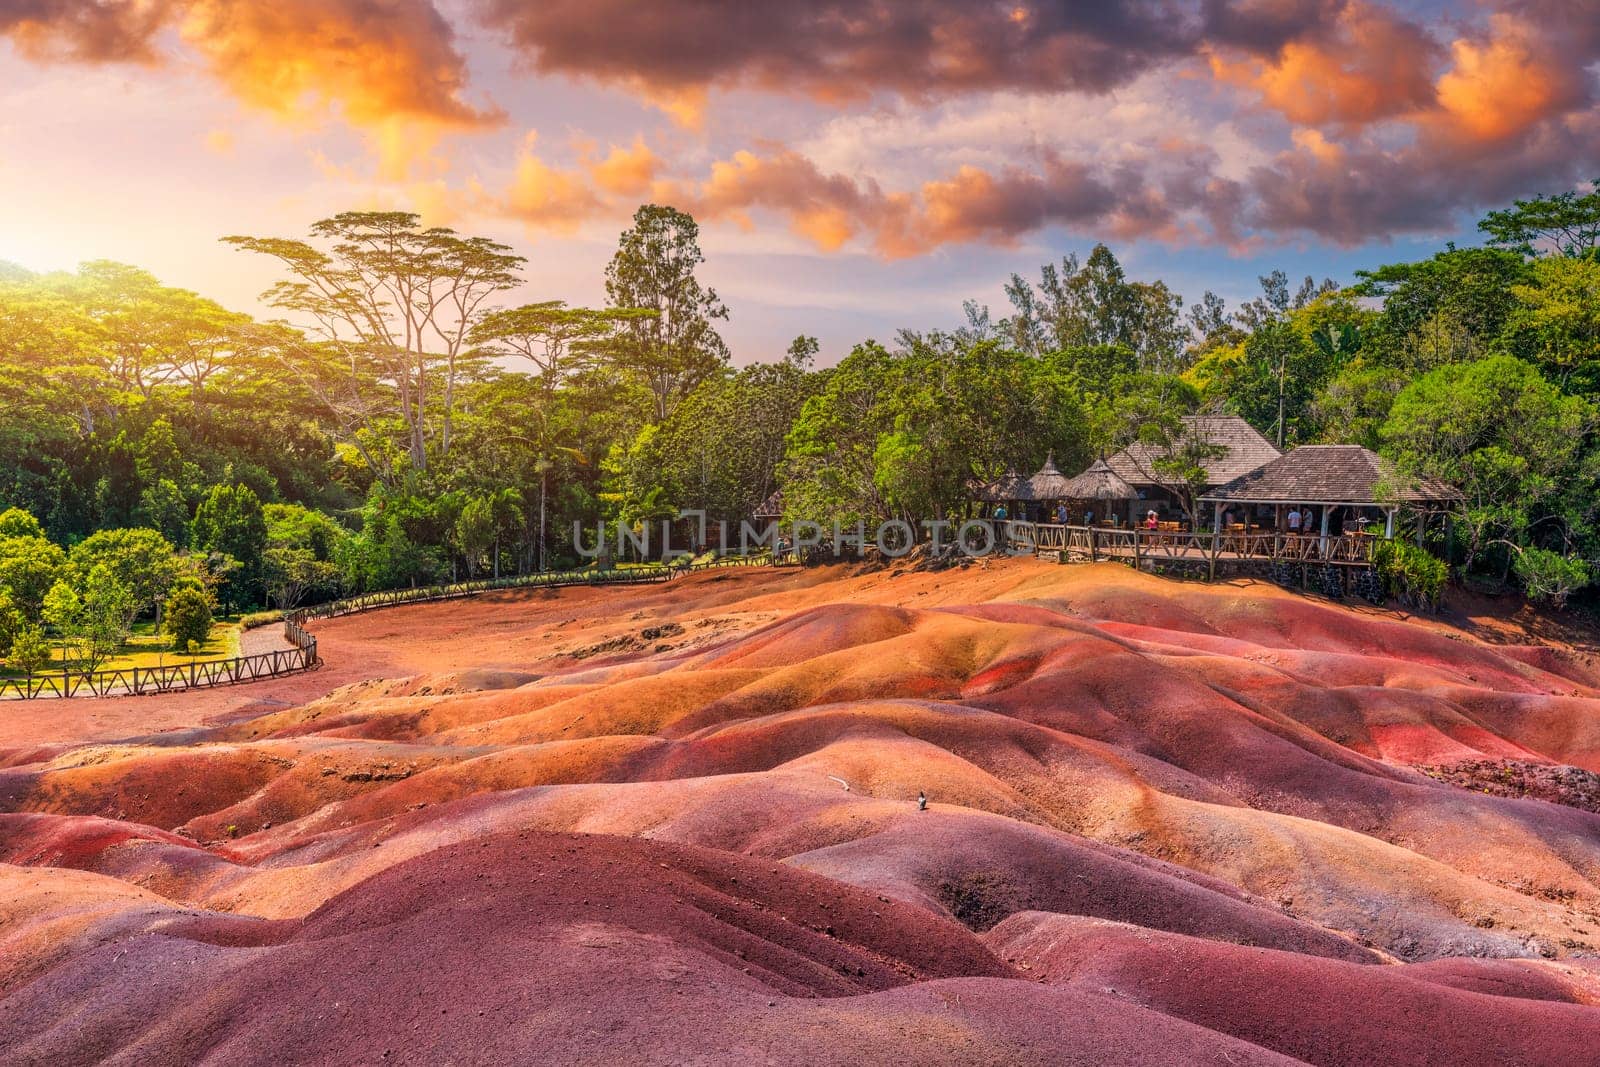 Chamarel Seven Colored Earth Geopark in Mauritius Island. Colorful panoramic landscape about this volcanic geological formation Chamarel Seven Colored Earth Geopark in Riviere noire district. by DaLiu